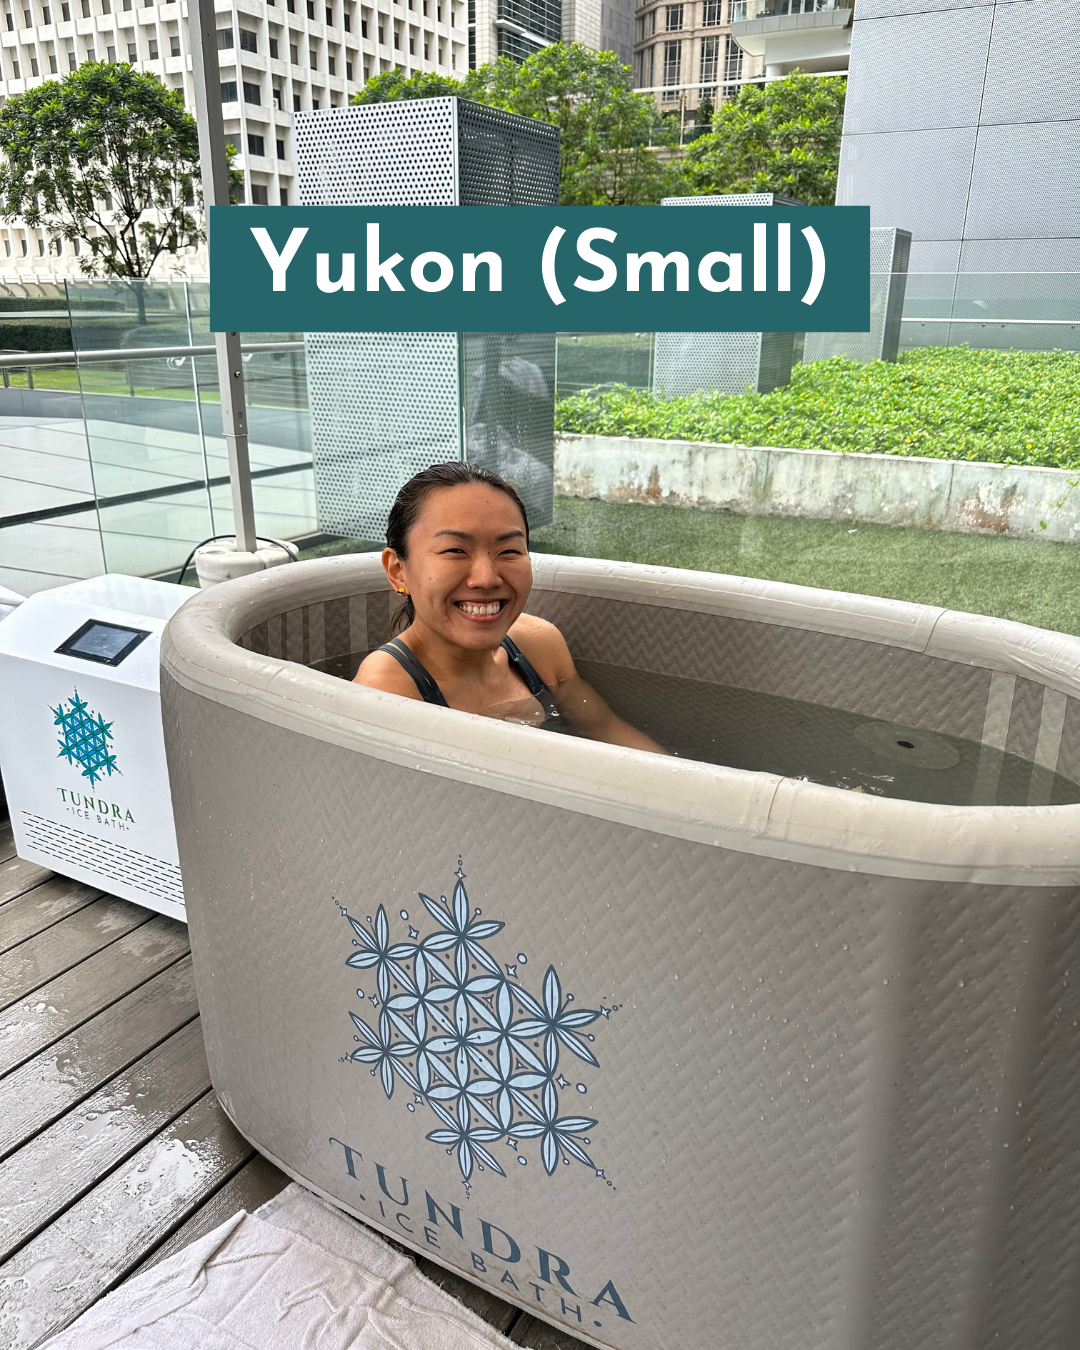 Rent a TUNDRA Ice Bath (Singapore only)